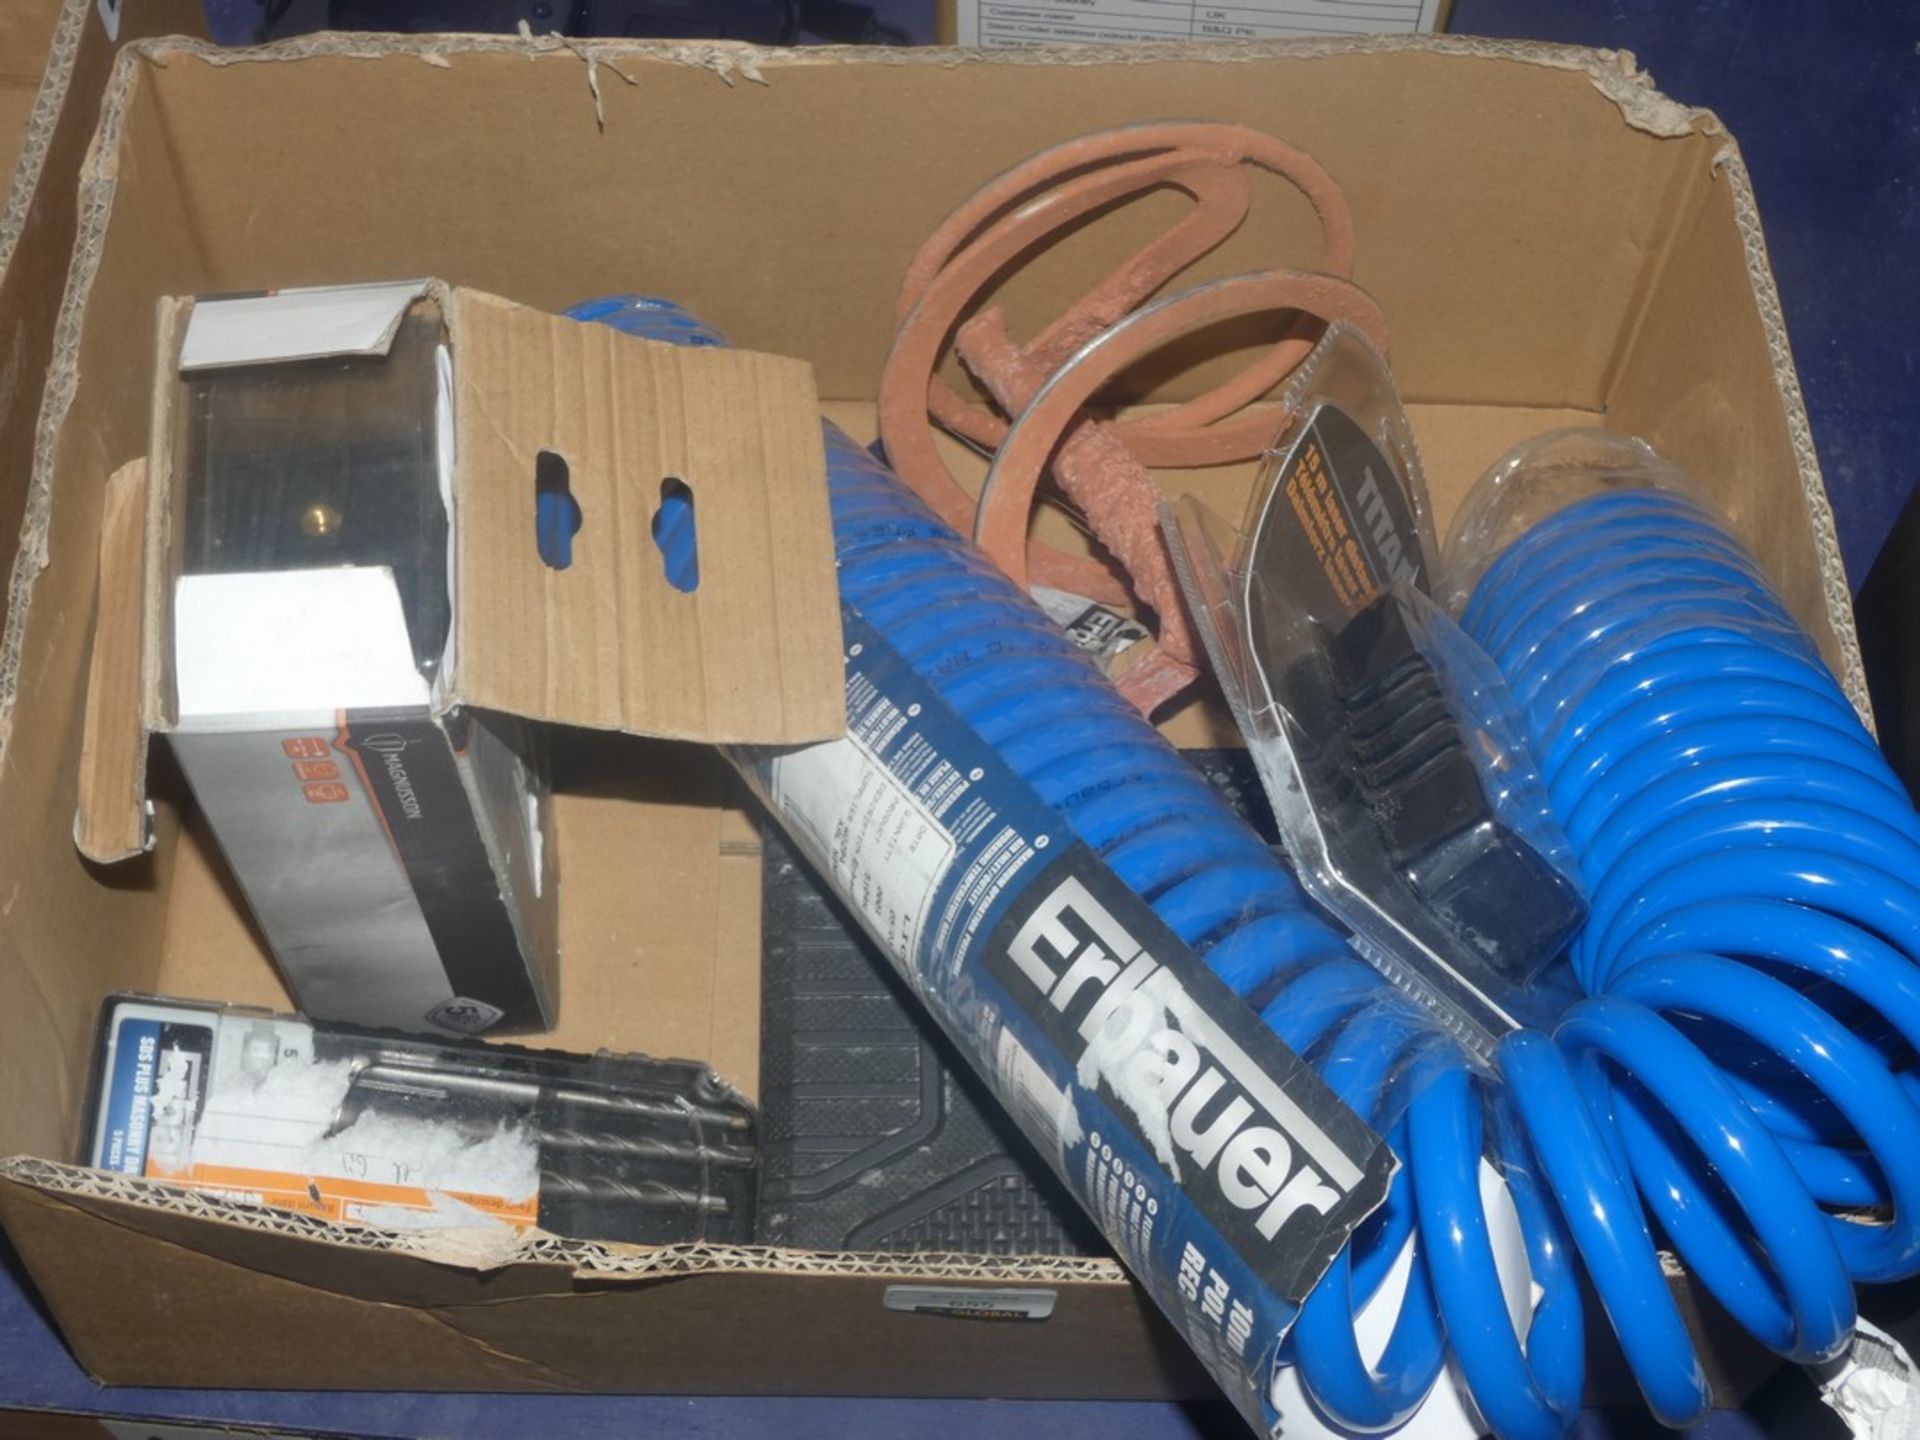 Lot to Contain 1 Erbauer Coiled Air Hose, 1 Magnesun Self Levelling Laser Leveller, 1 Pack of